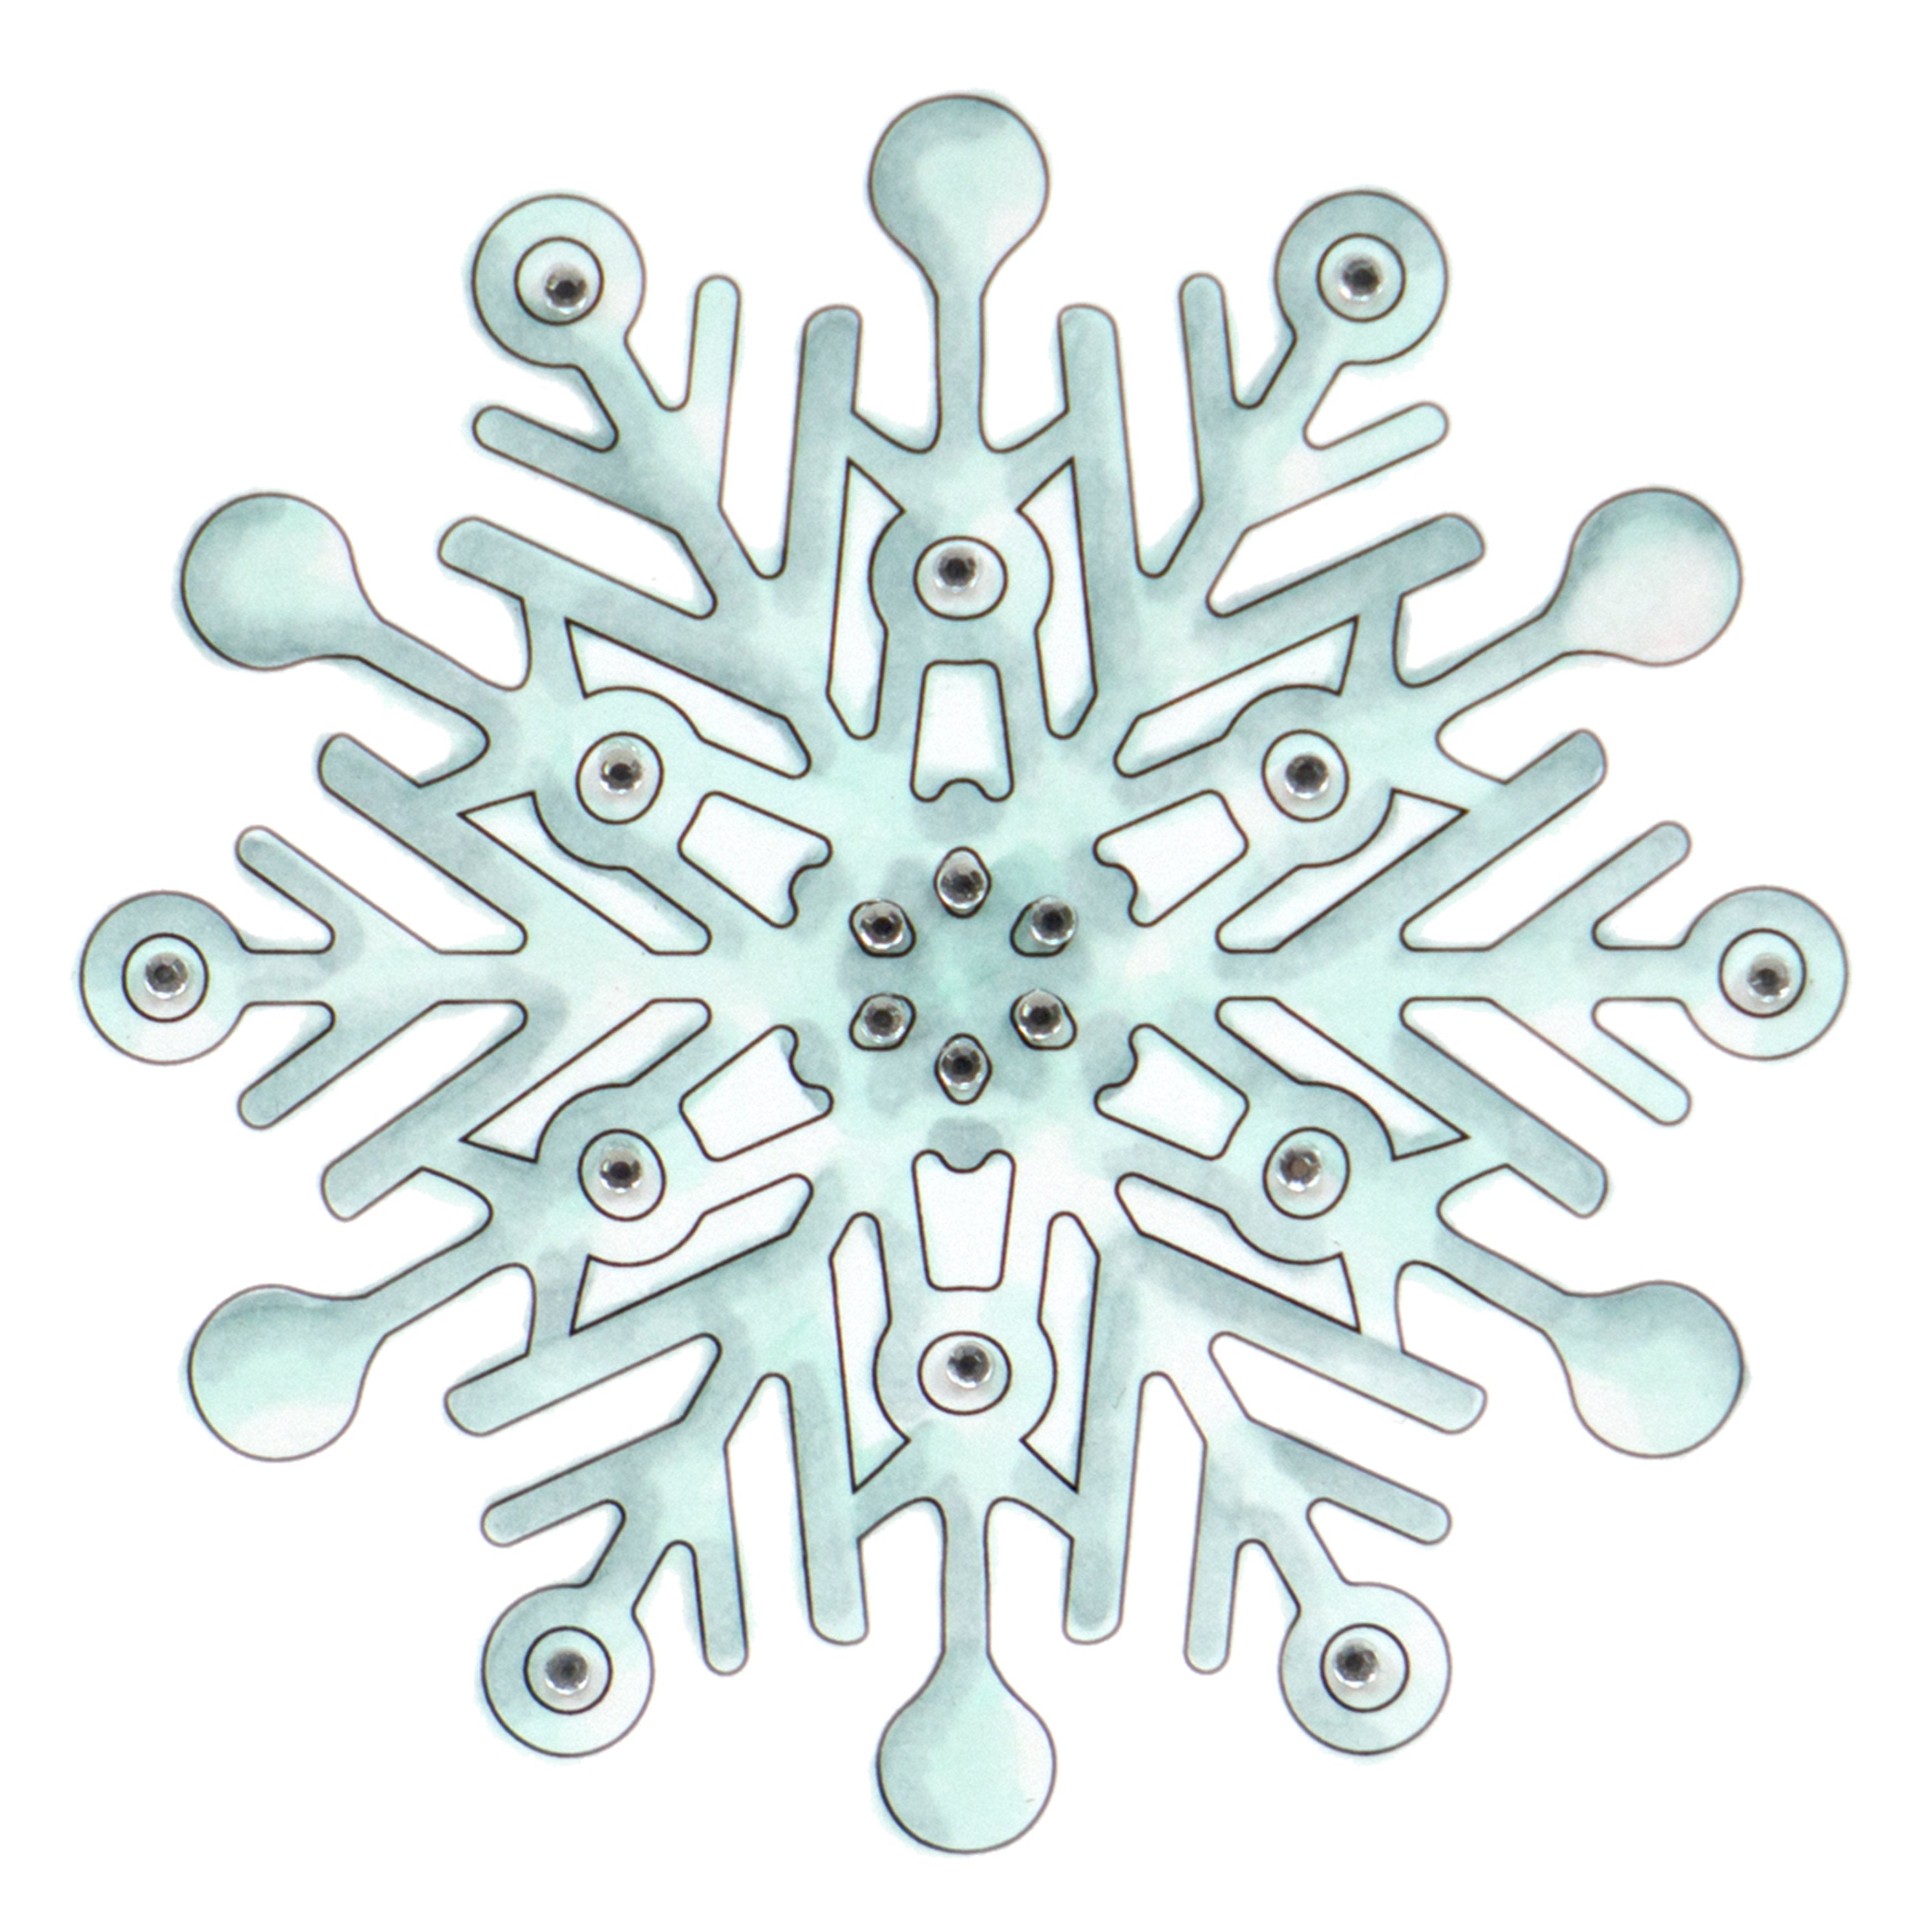 SNOWFLAKES STENCIL CHRISTMAS SNOWFLAKE STENCILS TEMPLATE TEMPLATES CRAFT #1  NEW